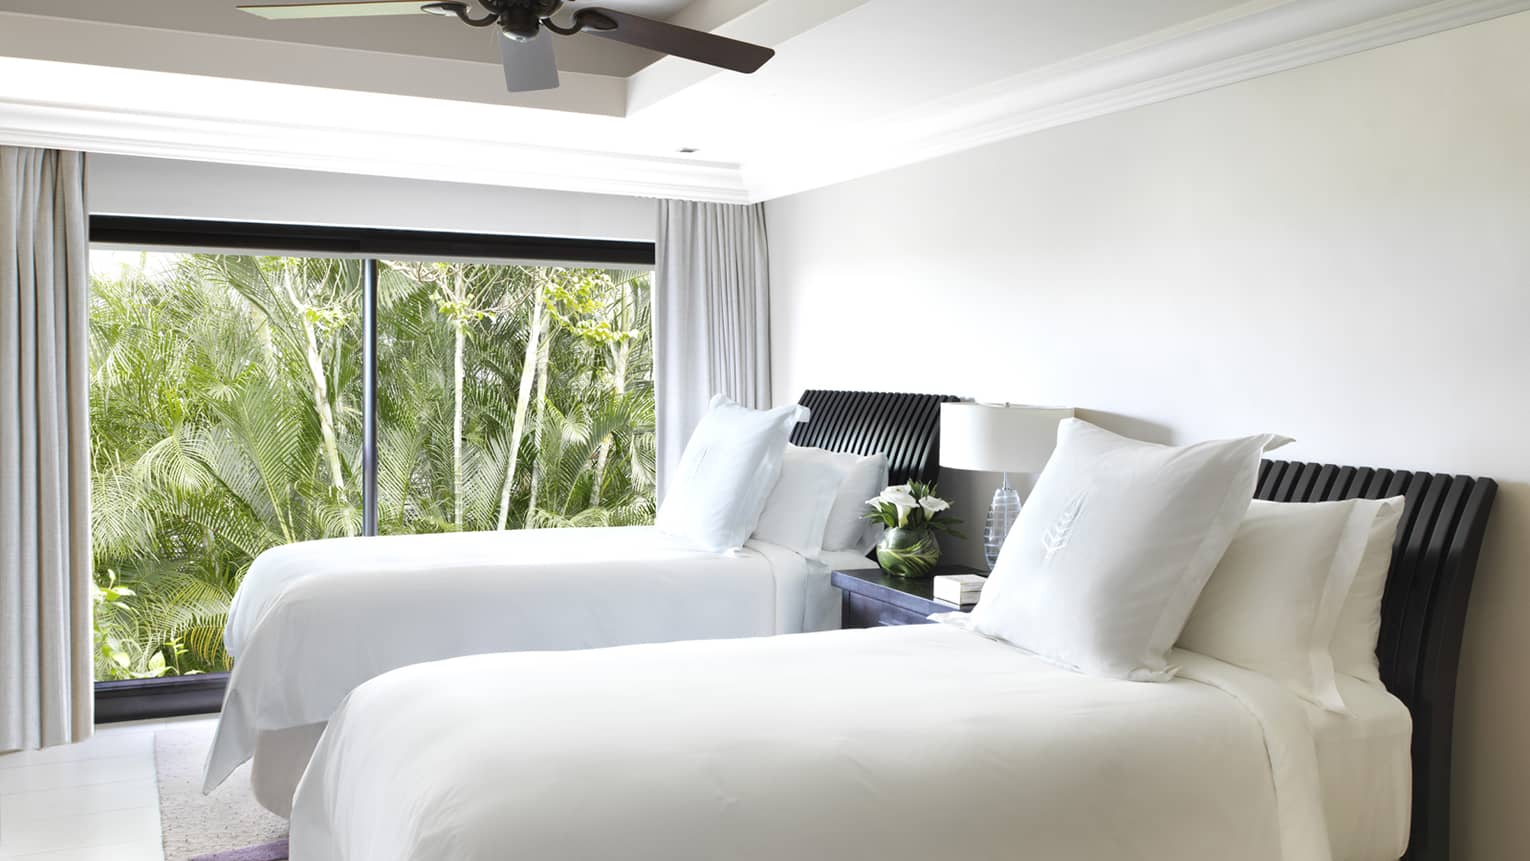 Two single beds with white linens, pillows in bright room by floor-to-ceiling window